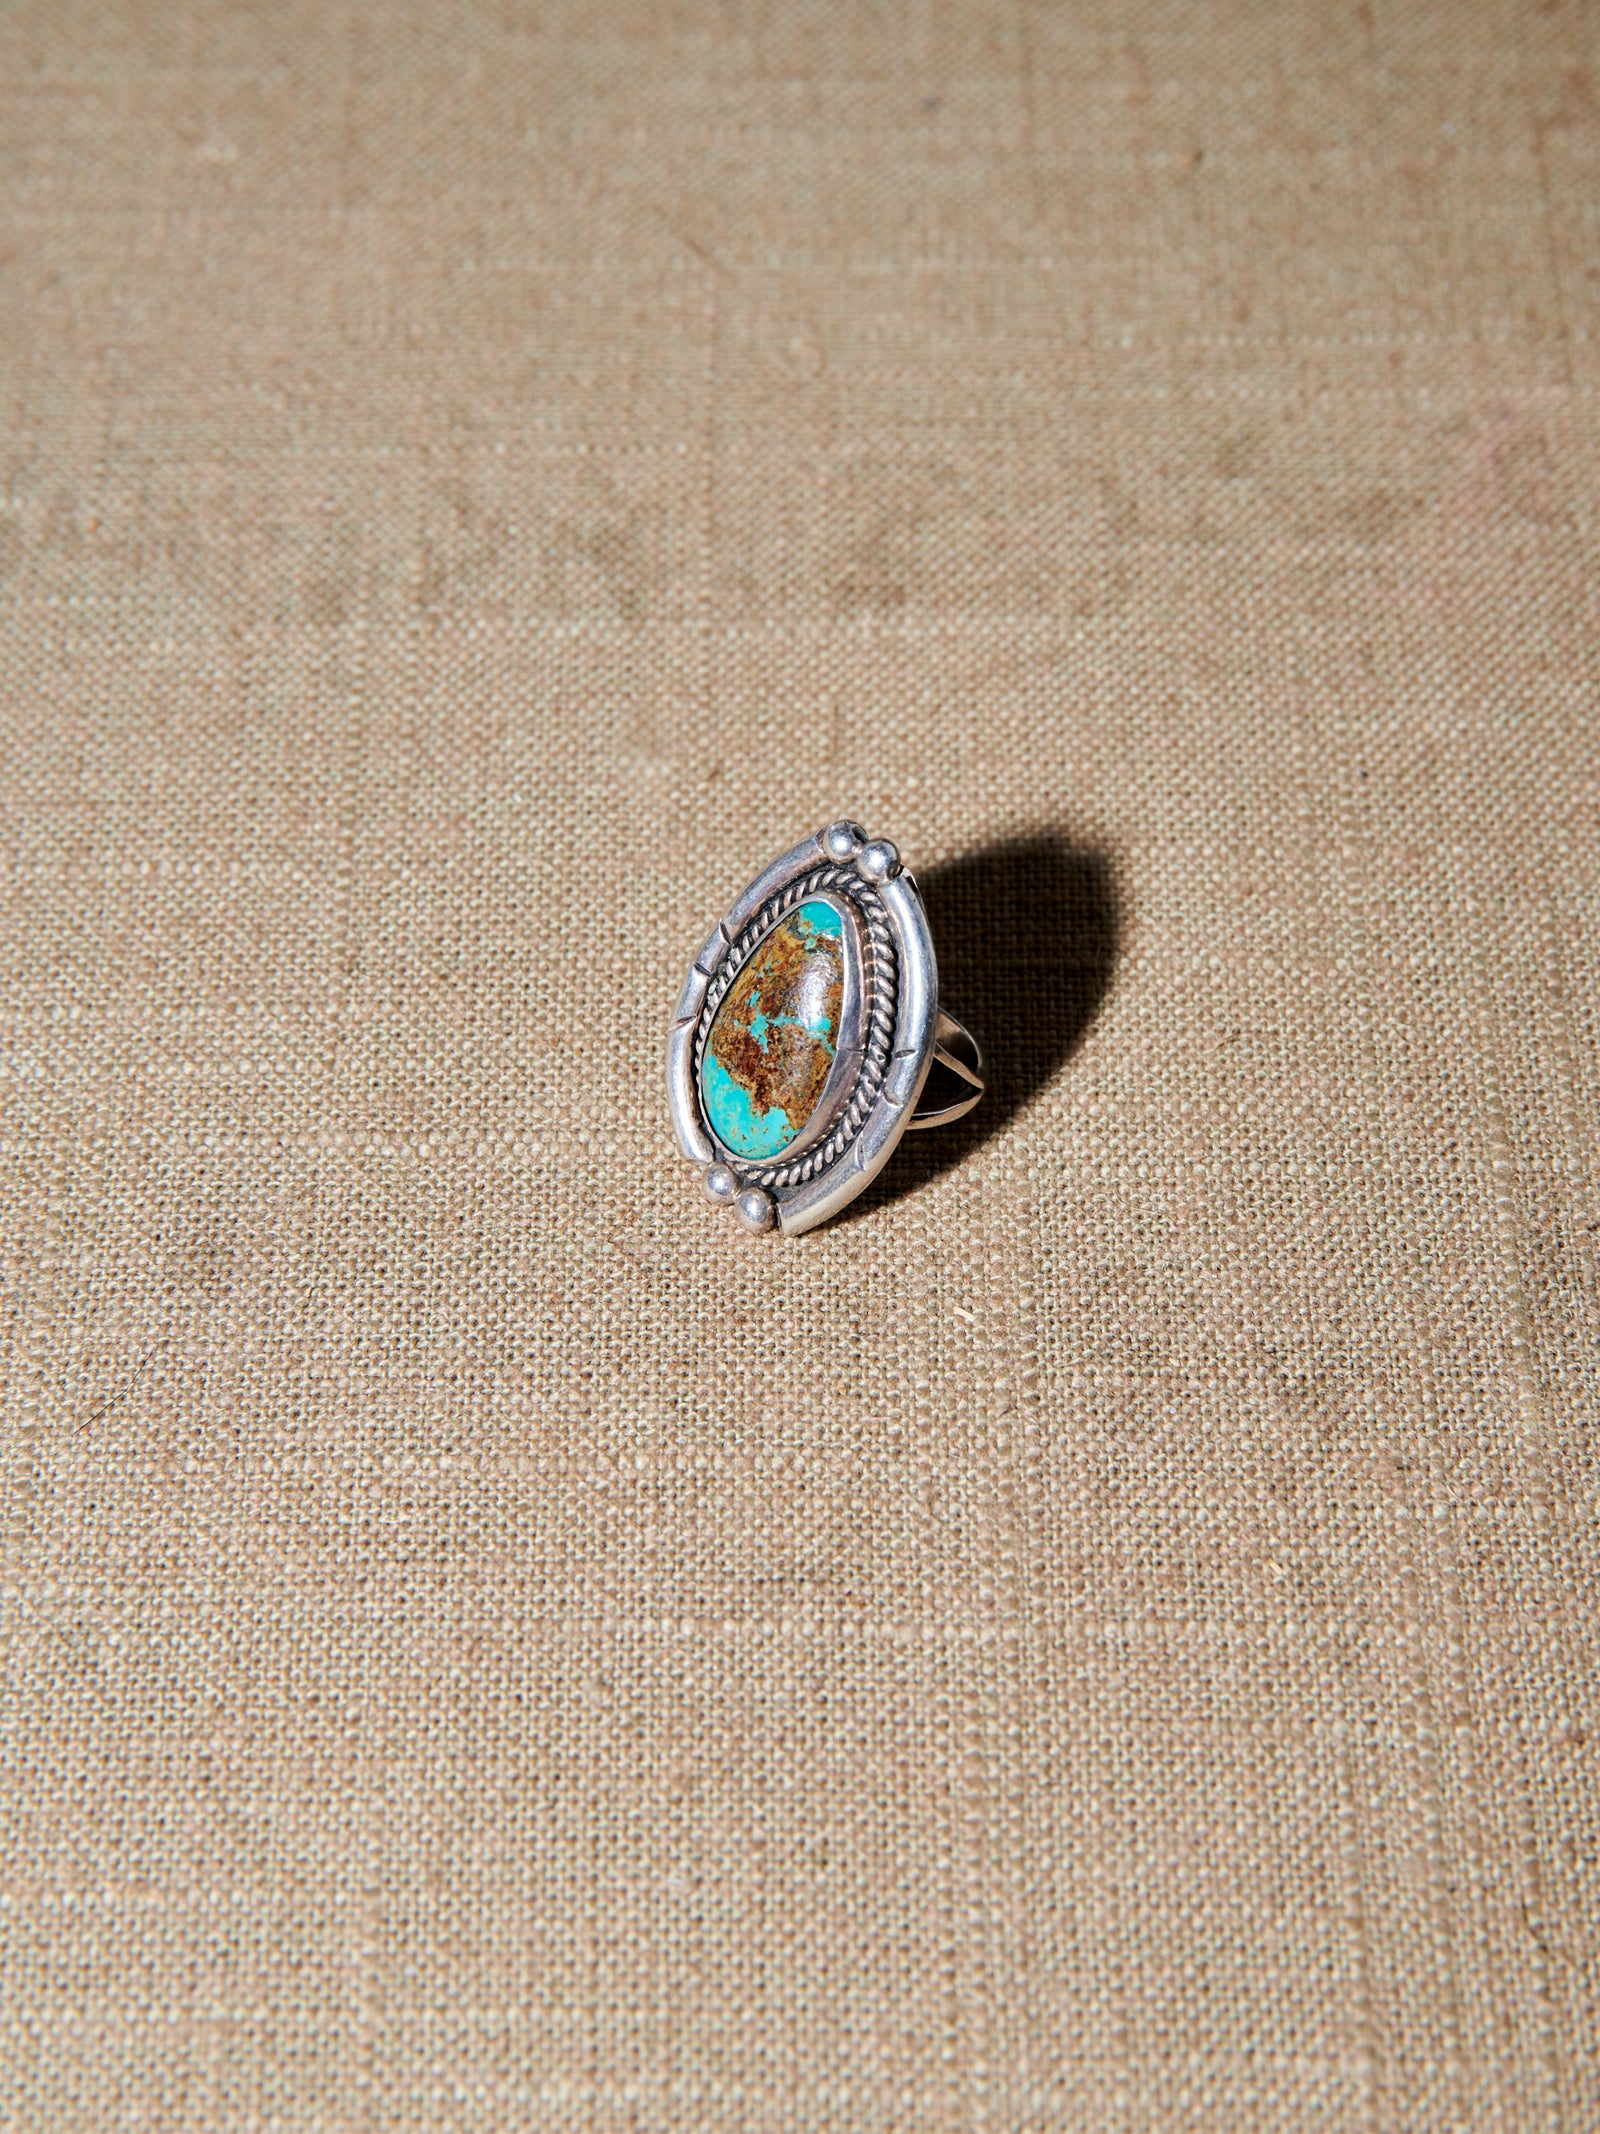 Turquoise Ring Top Close-up Unworn View